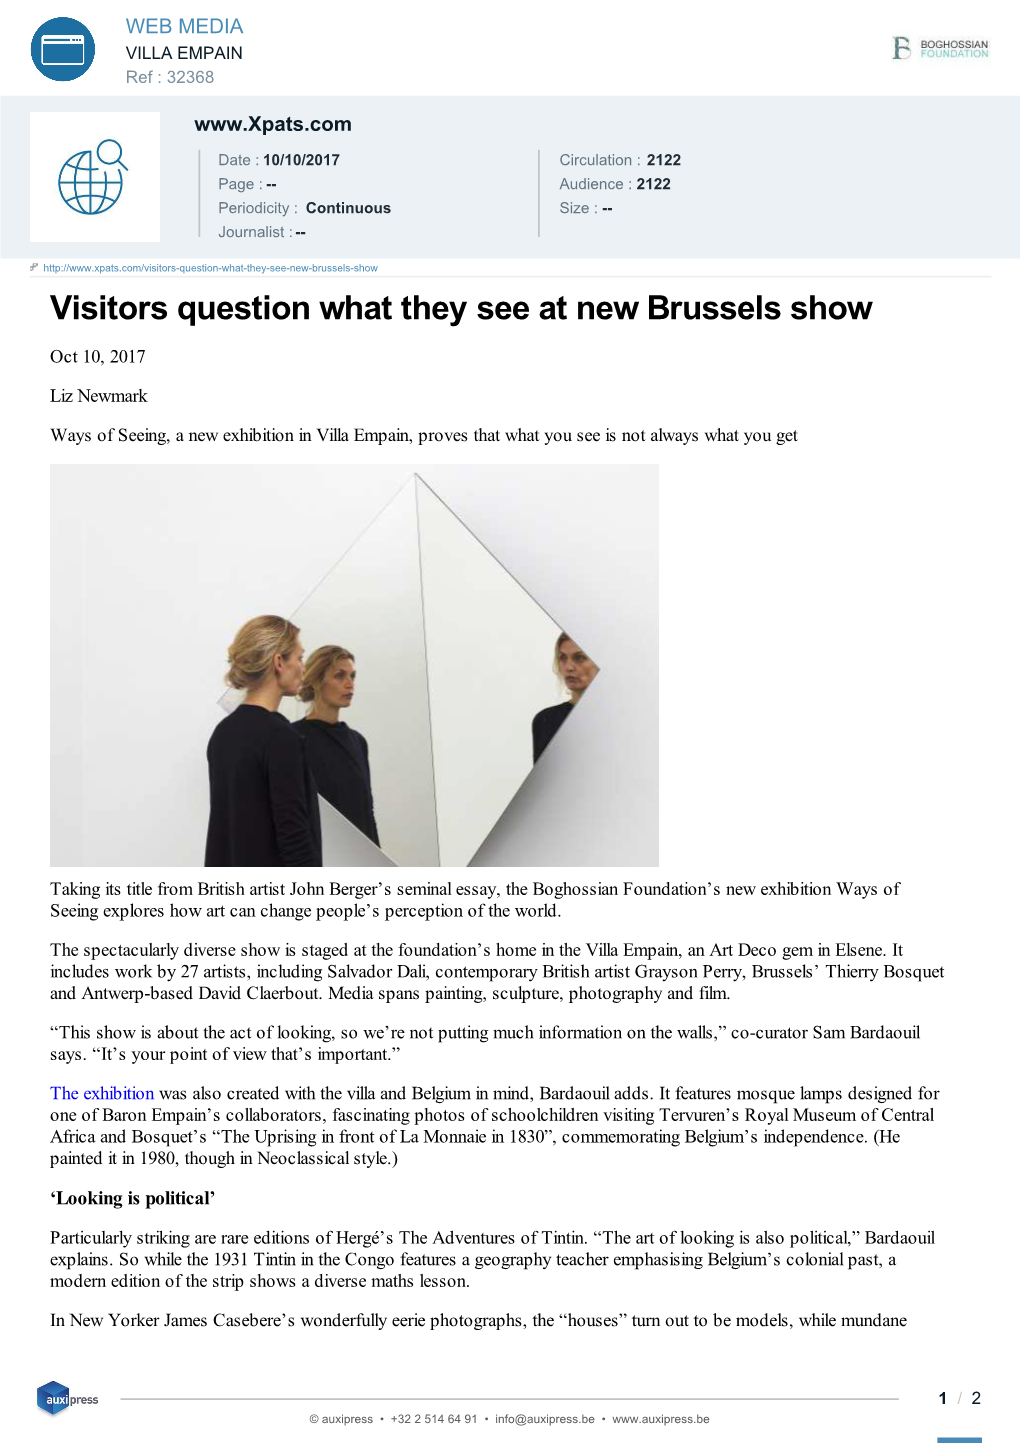 Visitors Question What They See at New Brussels Show